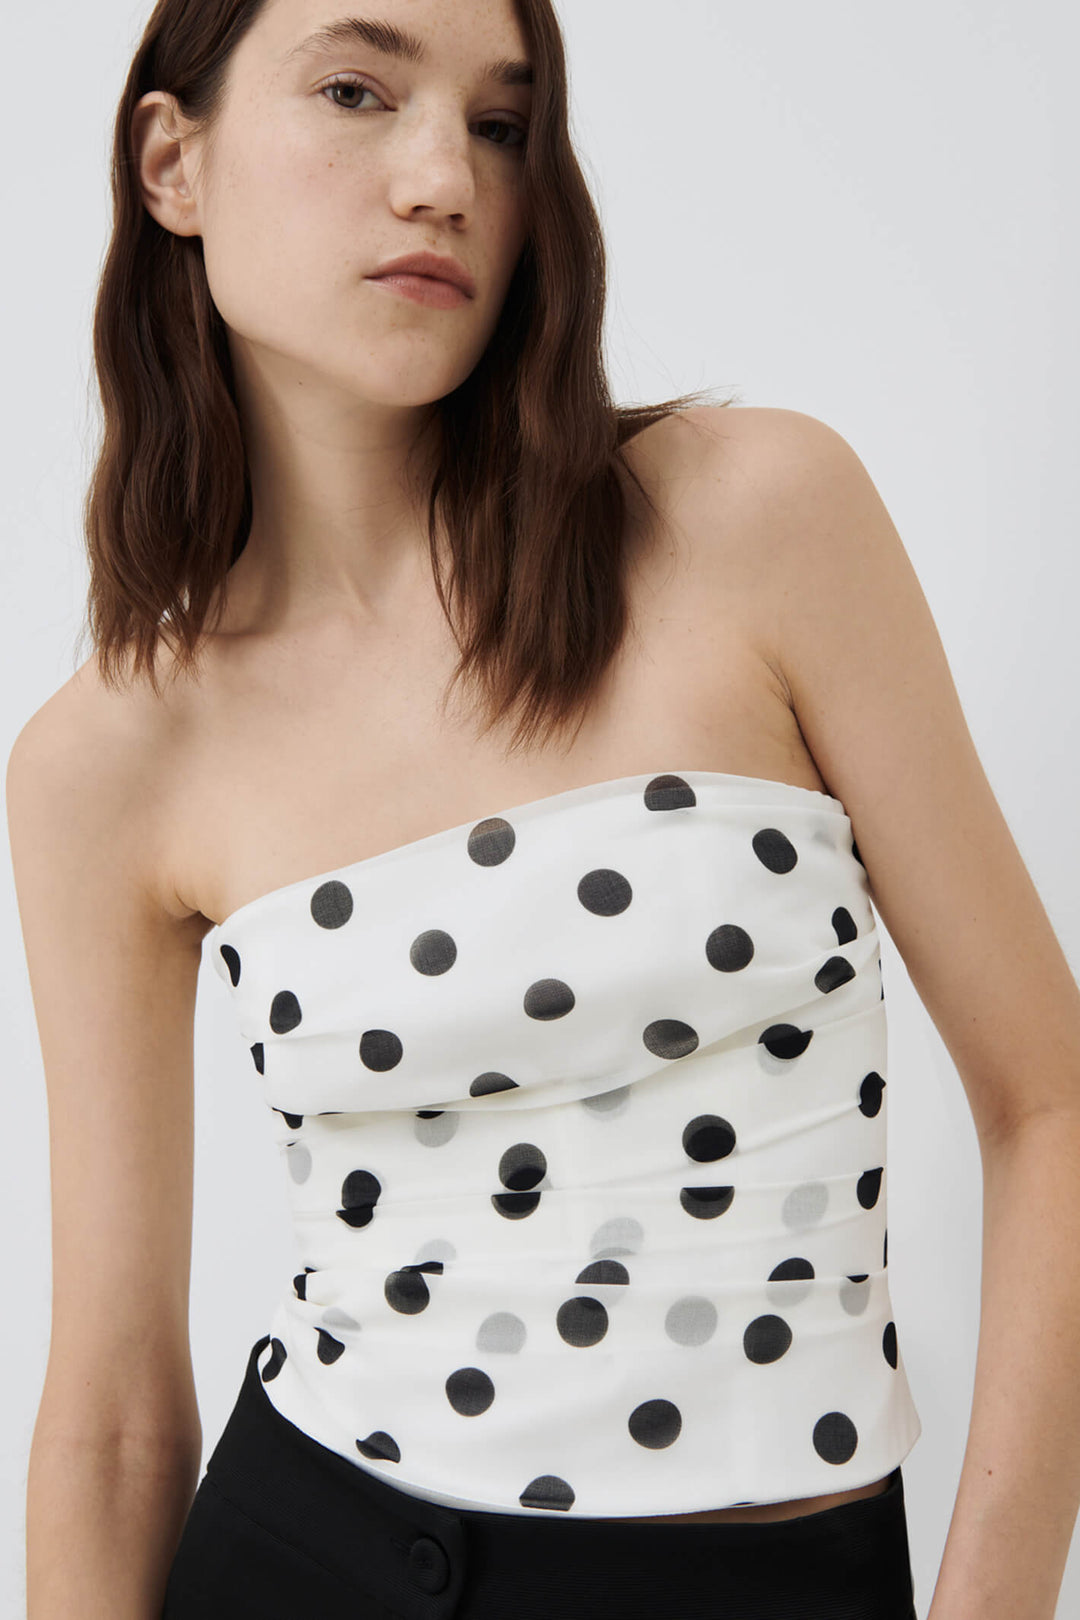 Marella OLIO Black and White Spot Top with Removable Sleeves - Olivia Grace Fashion